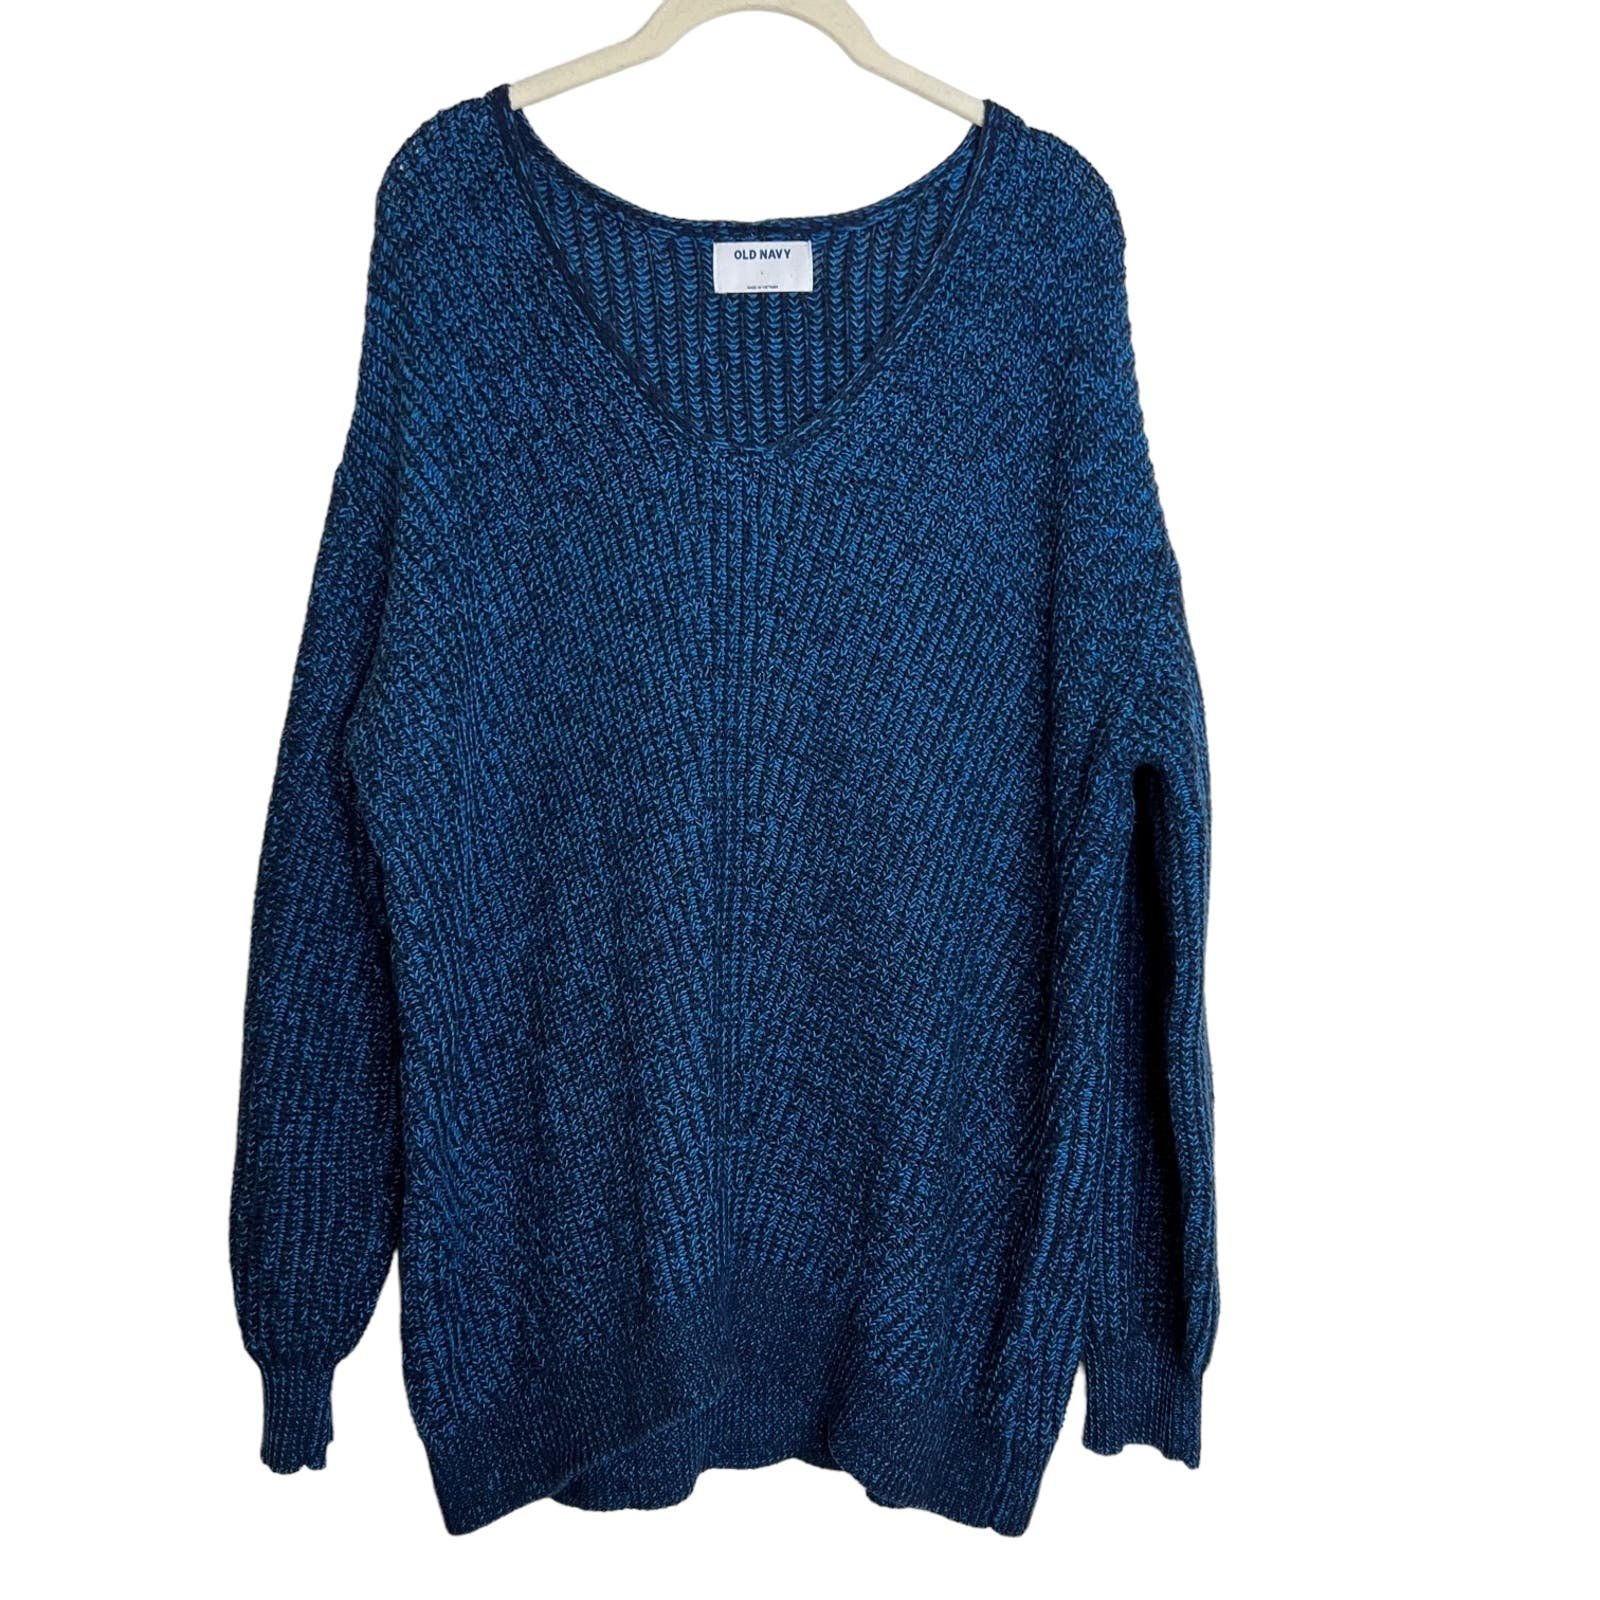 save up to 70% Old Navy Womens Sweater Large Blue Chunk